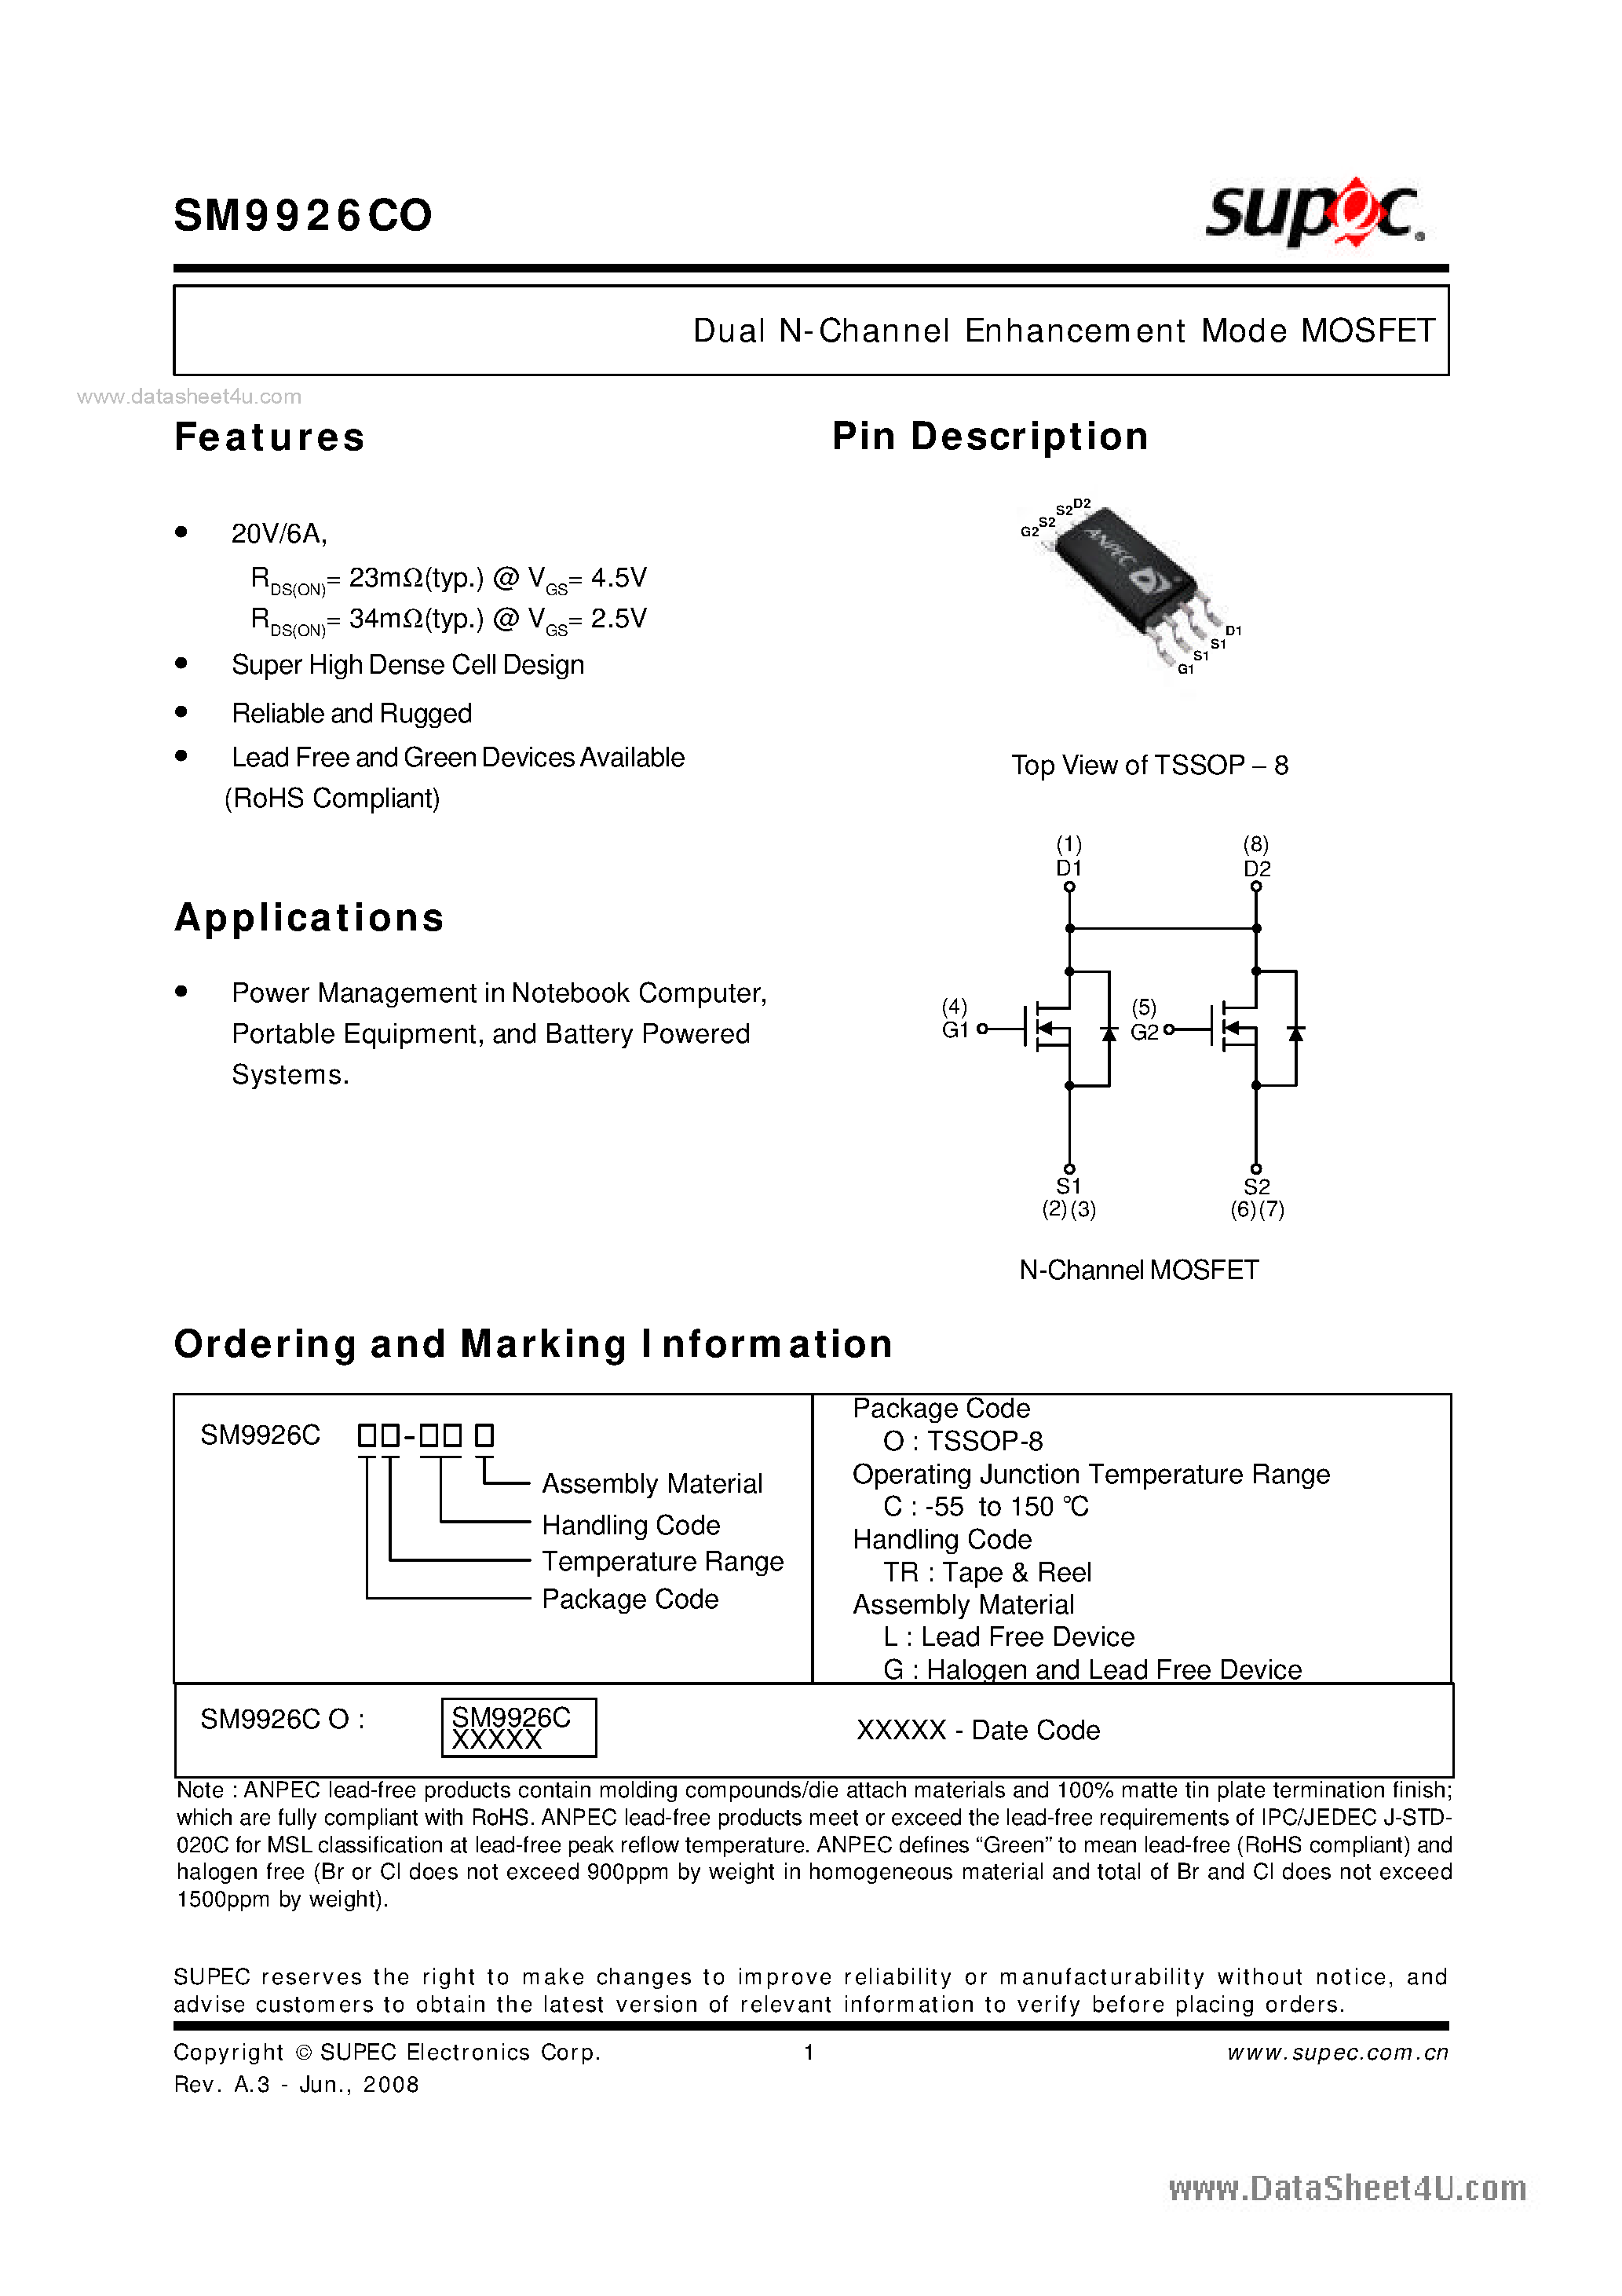 Datasheet SM9926CO - Dual N-Channel Enhancement Mode MOSFET page 1